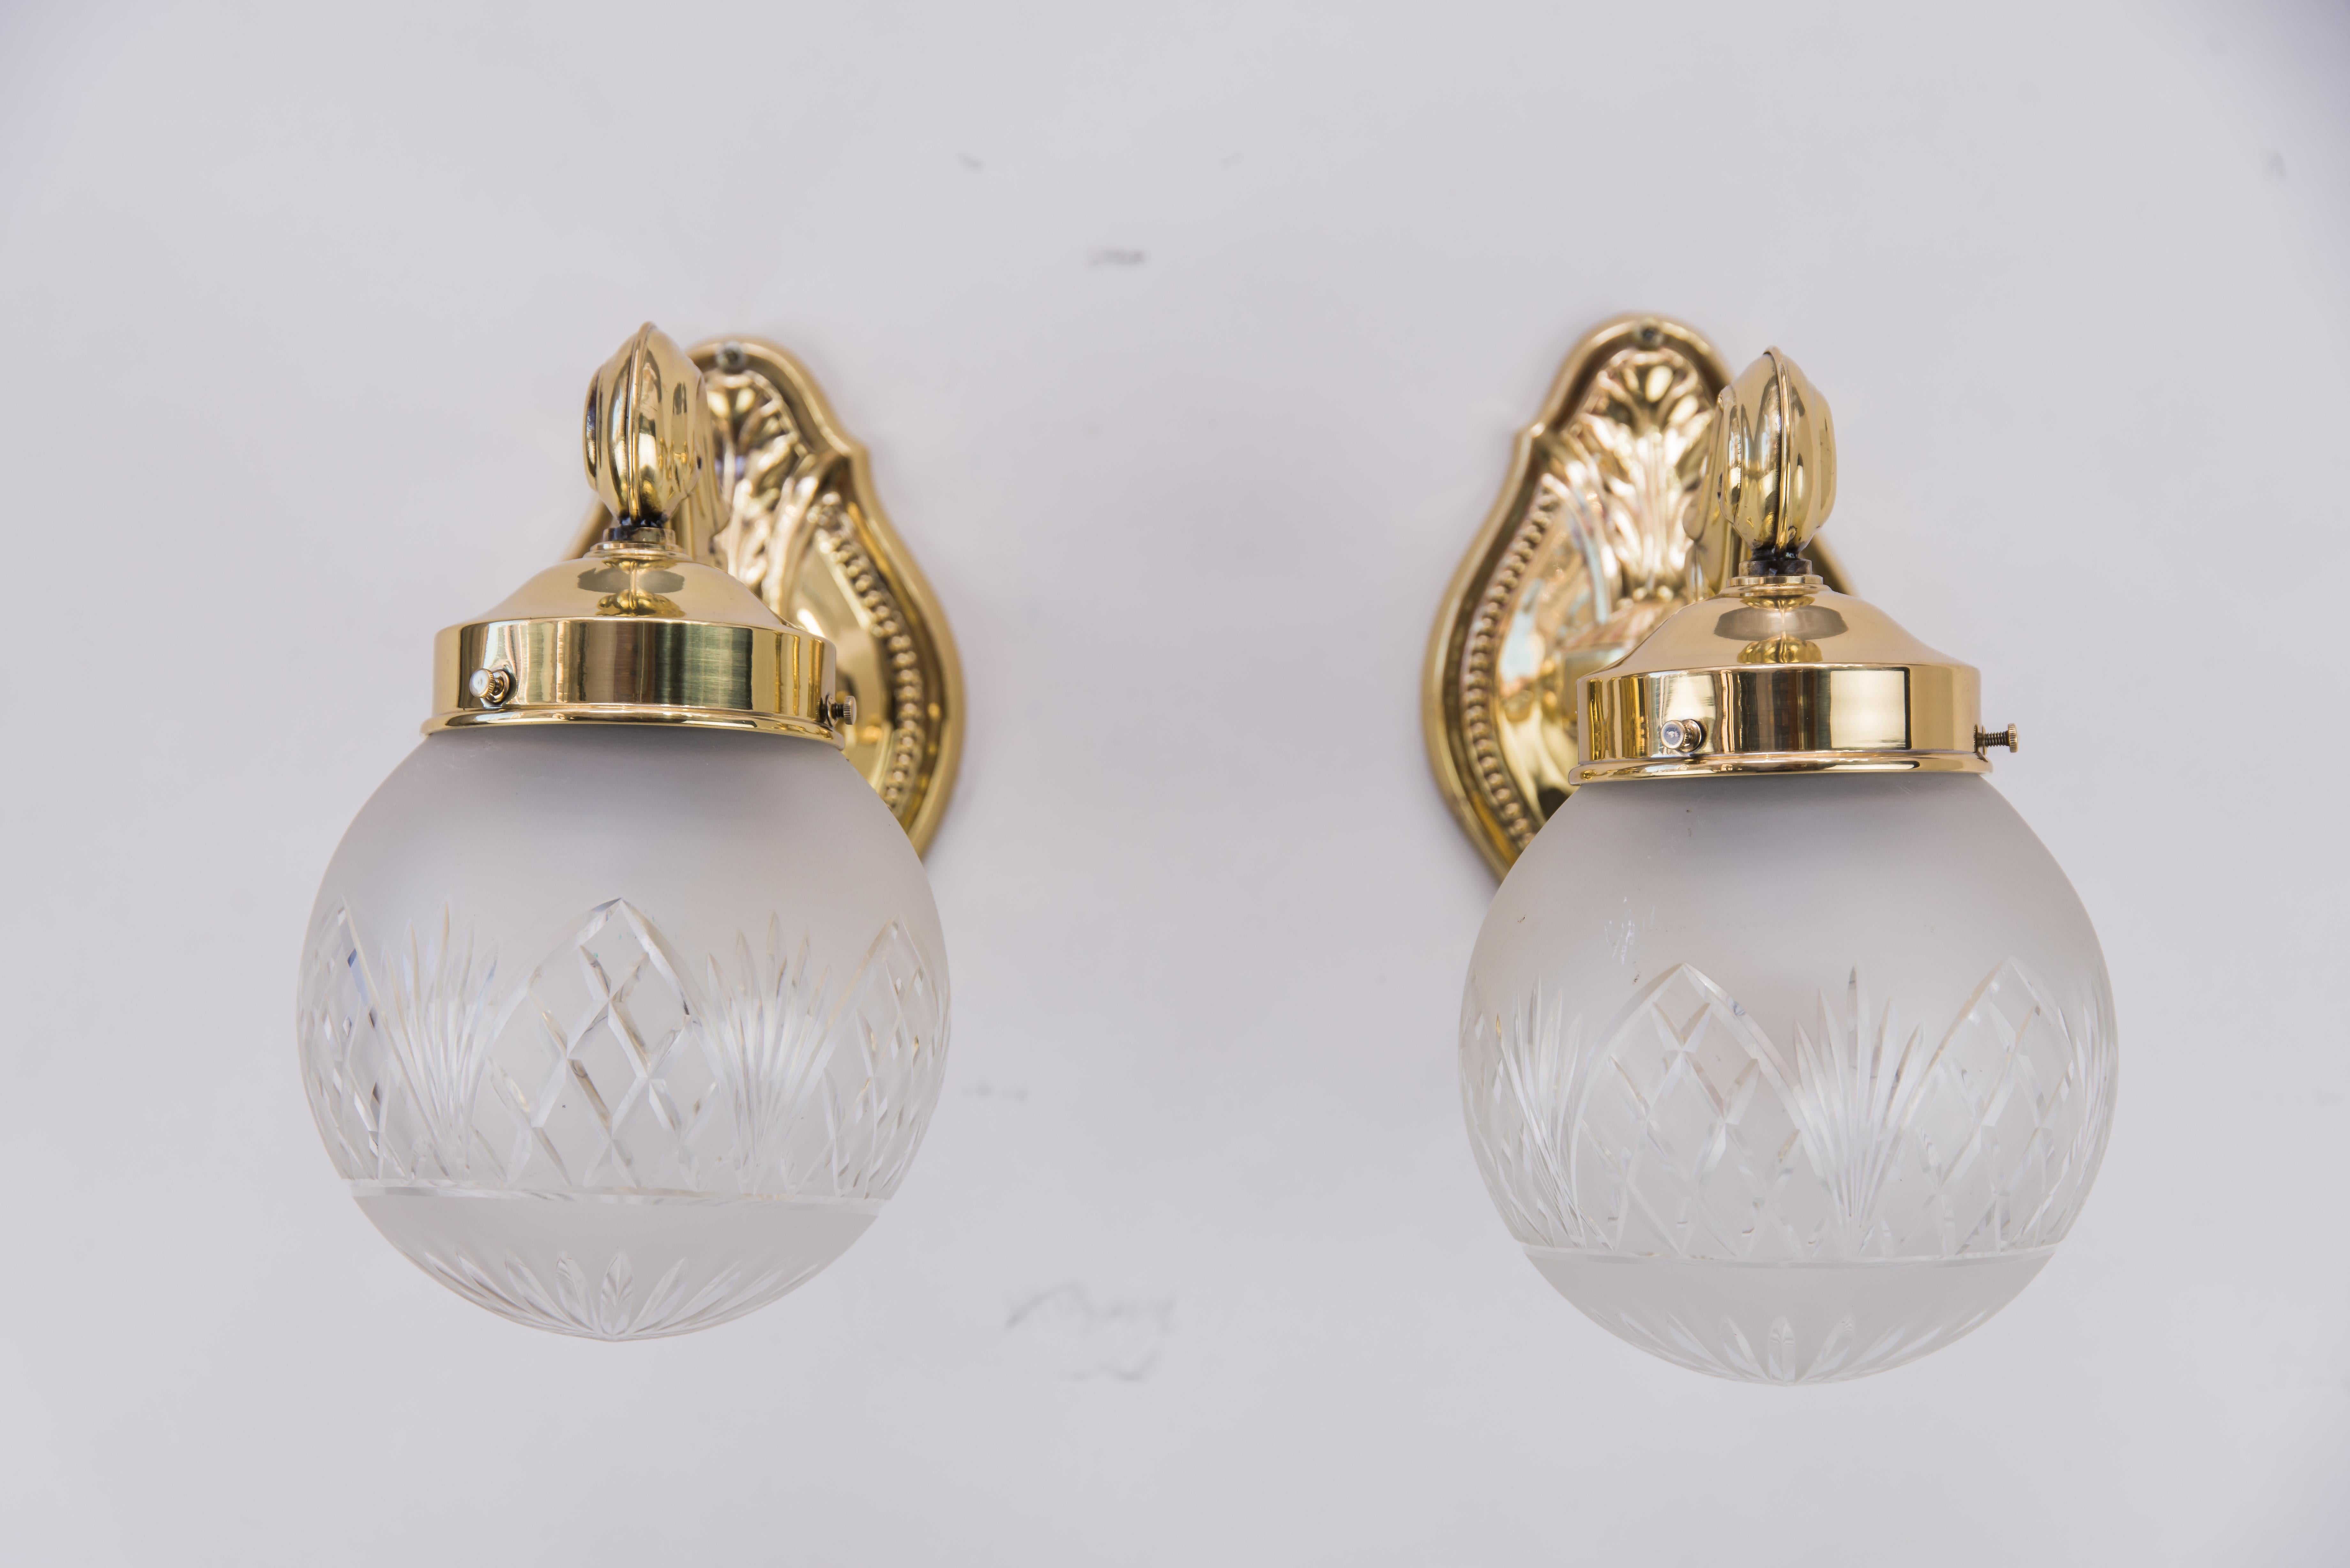 Austrian Two Historistic Wall sconces around 1890s with original cut glass shades